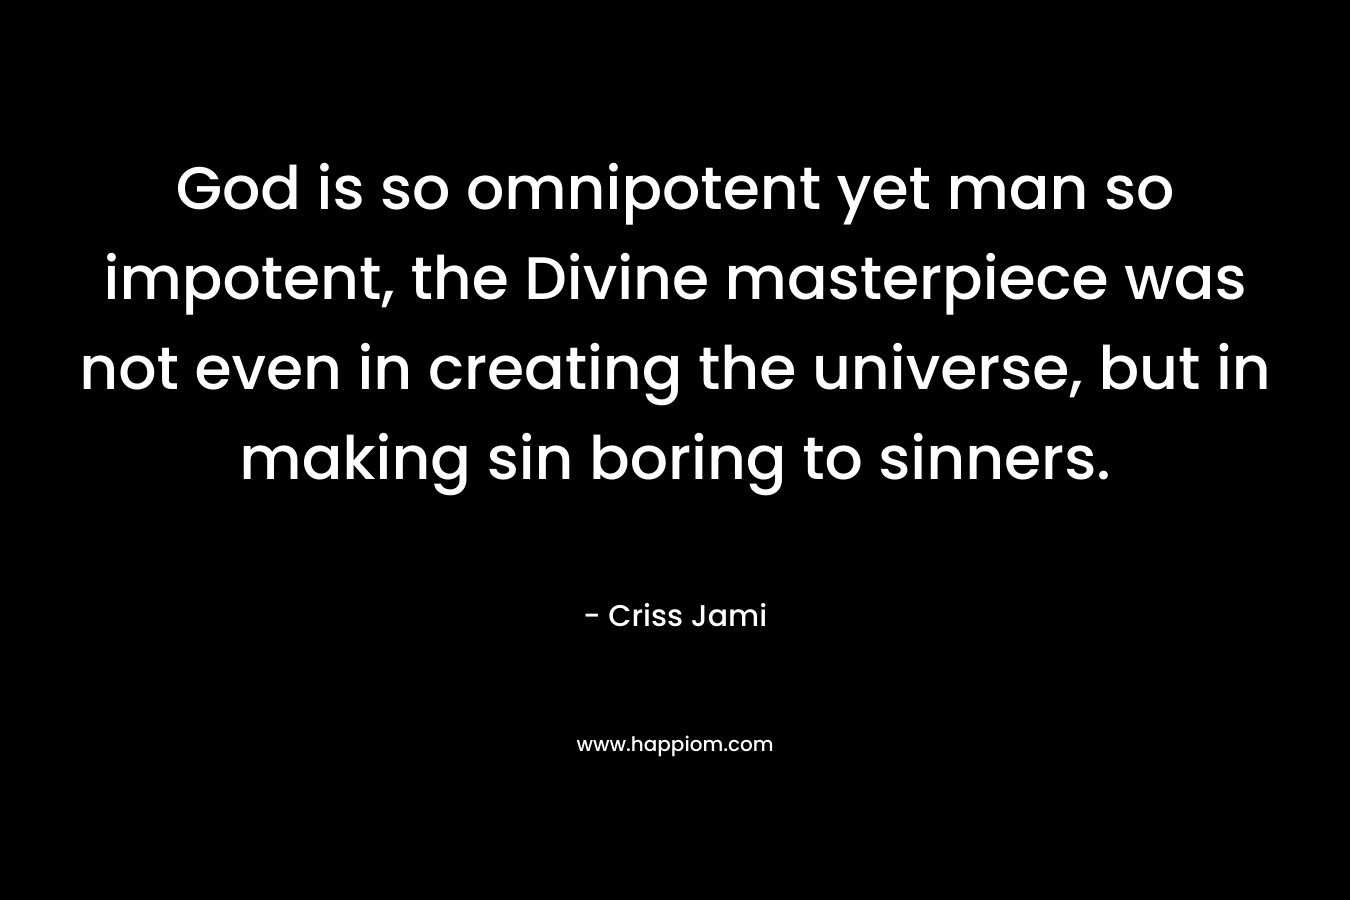 God is so omnipotent yet man so impotent, the Divine masterpiece was not even in creating the universe, but in making sin boring to sinners.